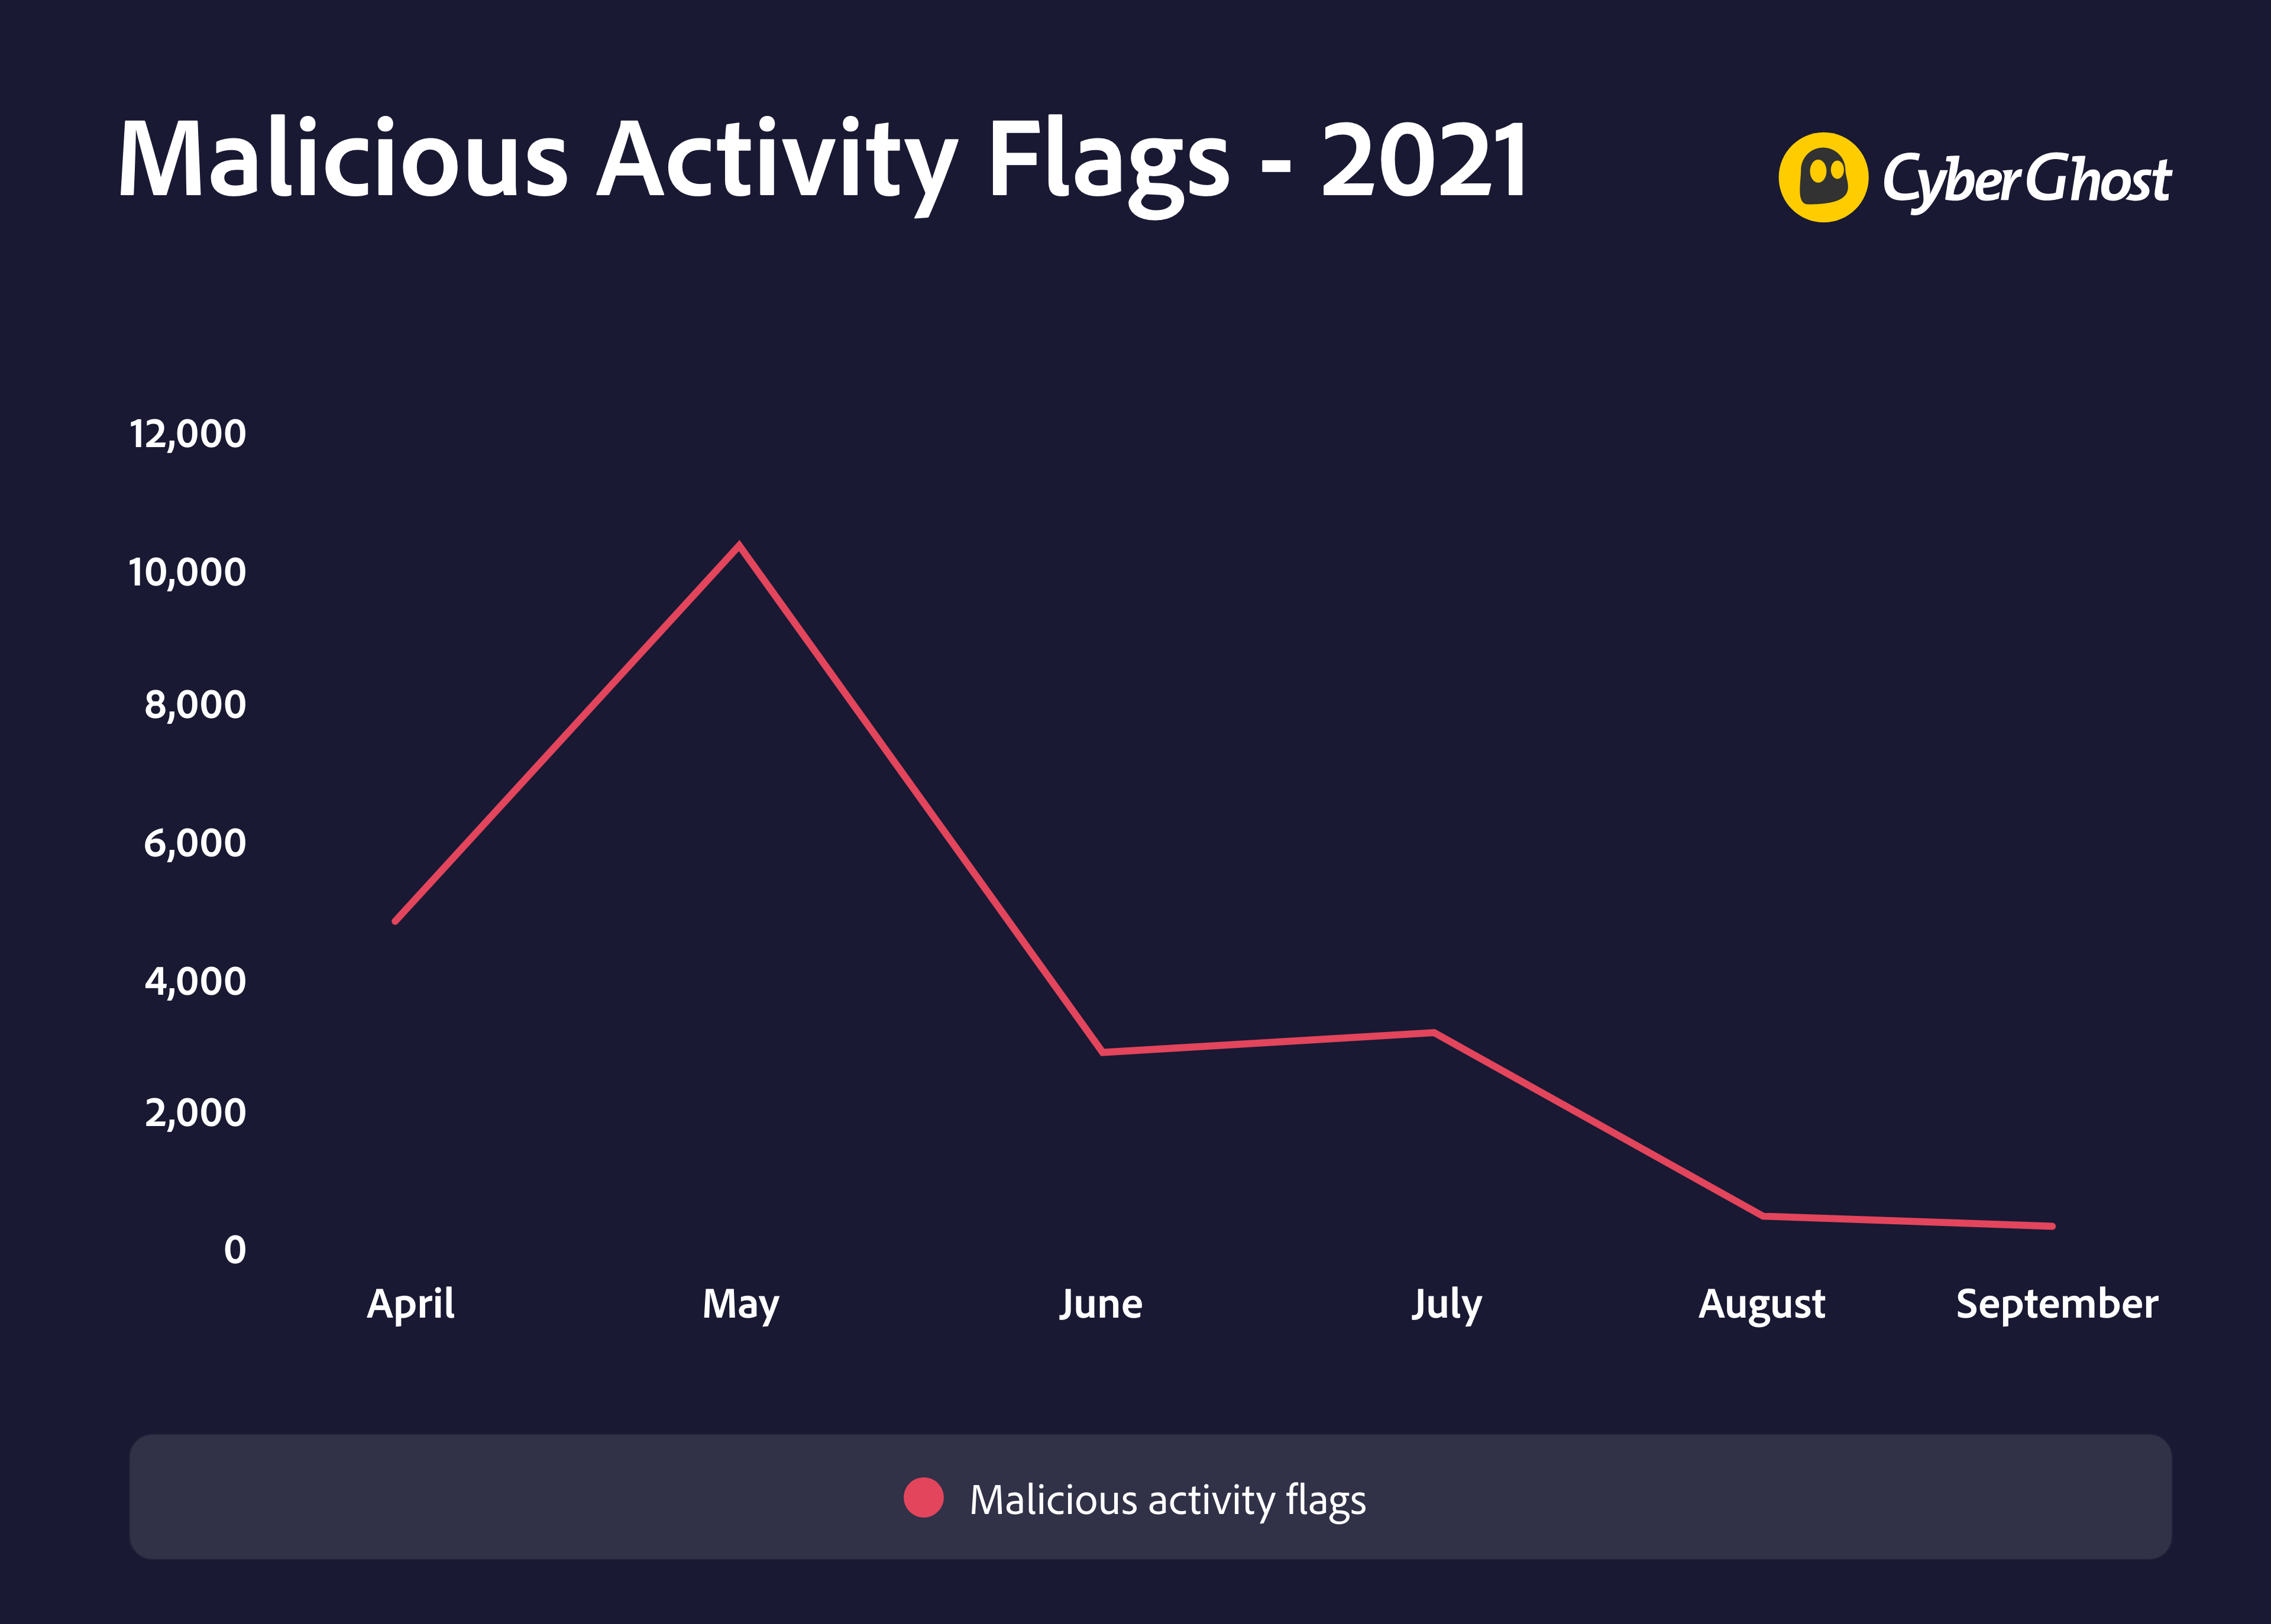 CyberGhost VPN's report comparing malicious activity flags from Q2 to Q3 2021